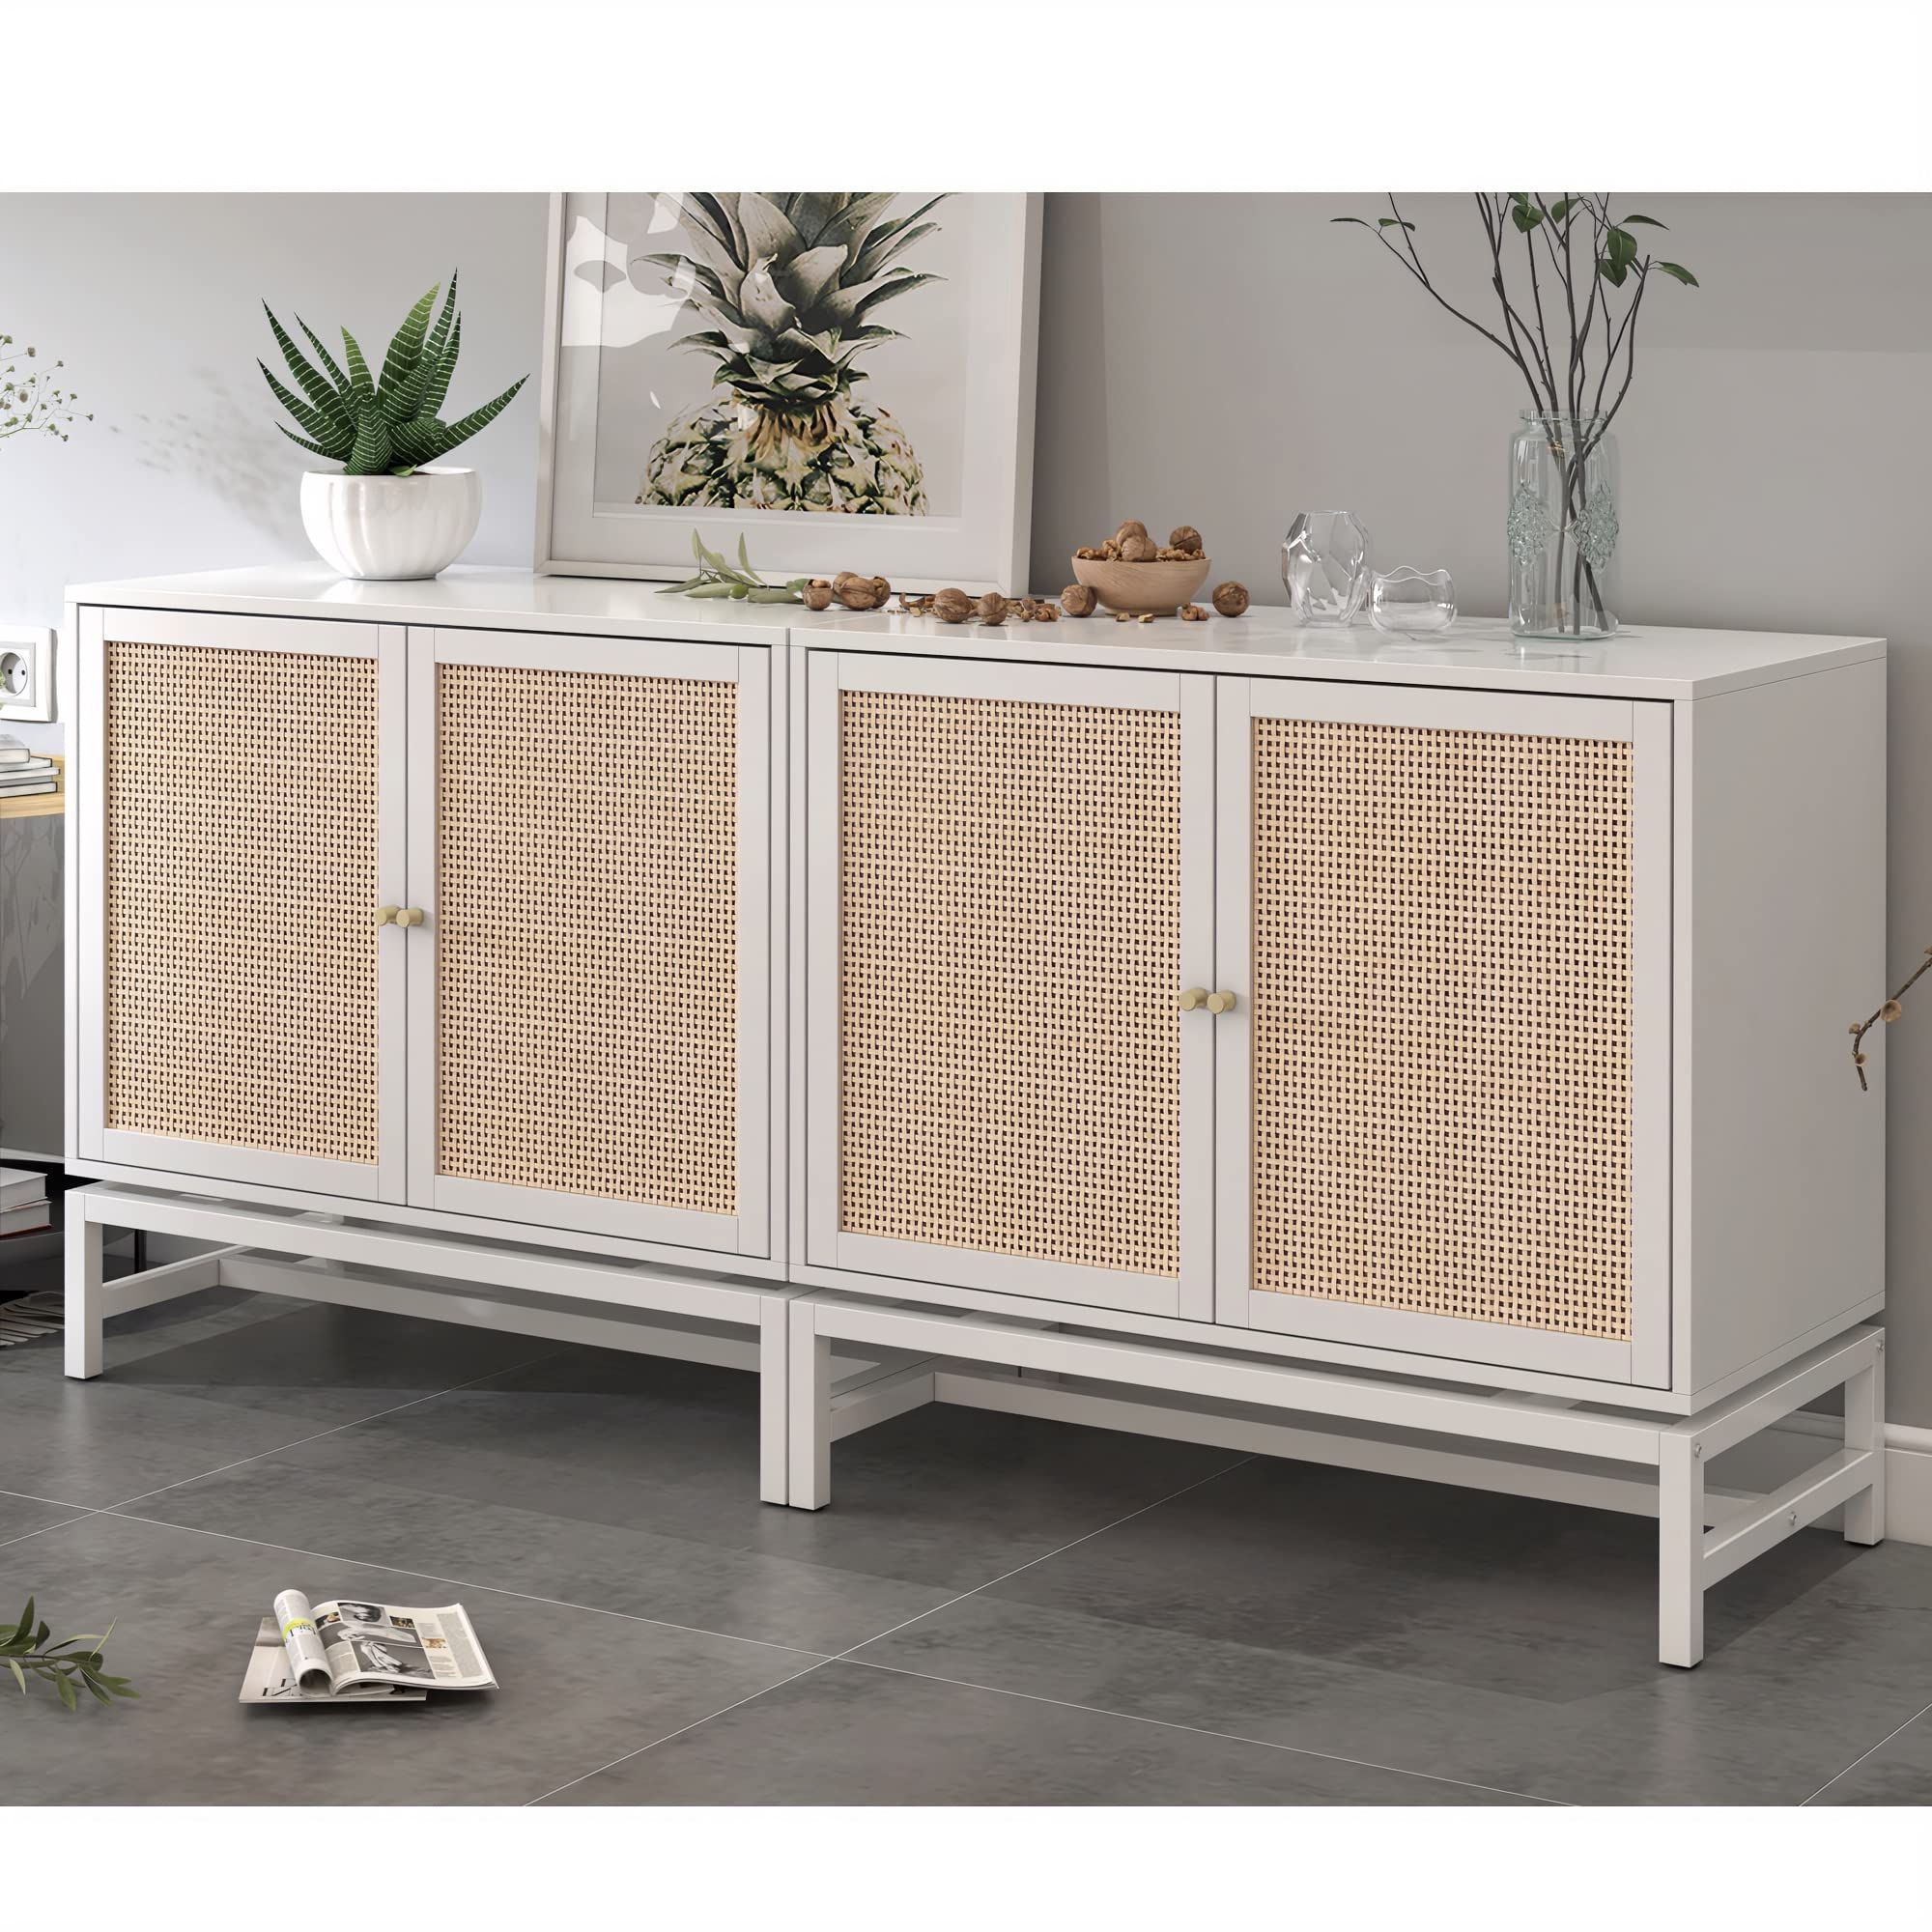 Assembled Rattan Buffet Sideboards Inside Well Known Amazon – Awqm 2pcs Rattan Sideboard Buffet Cabinet With  Storage,kithchen Accent Storage Cabinet With Doors Console Table With  Adjustable Shelves,wood Console Cabinet For Dining Room,living Room,white –  Buffets & Sideboards (View 6 of 10)